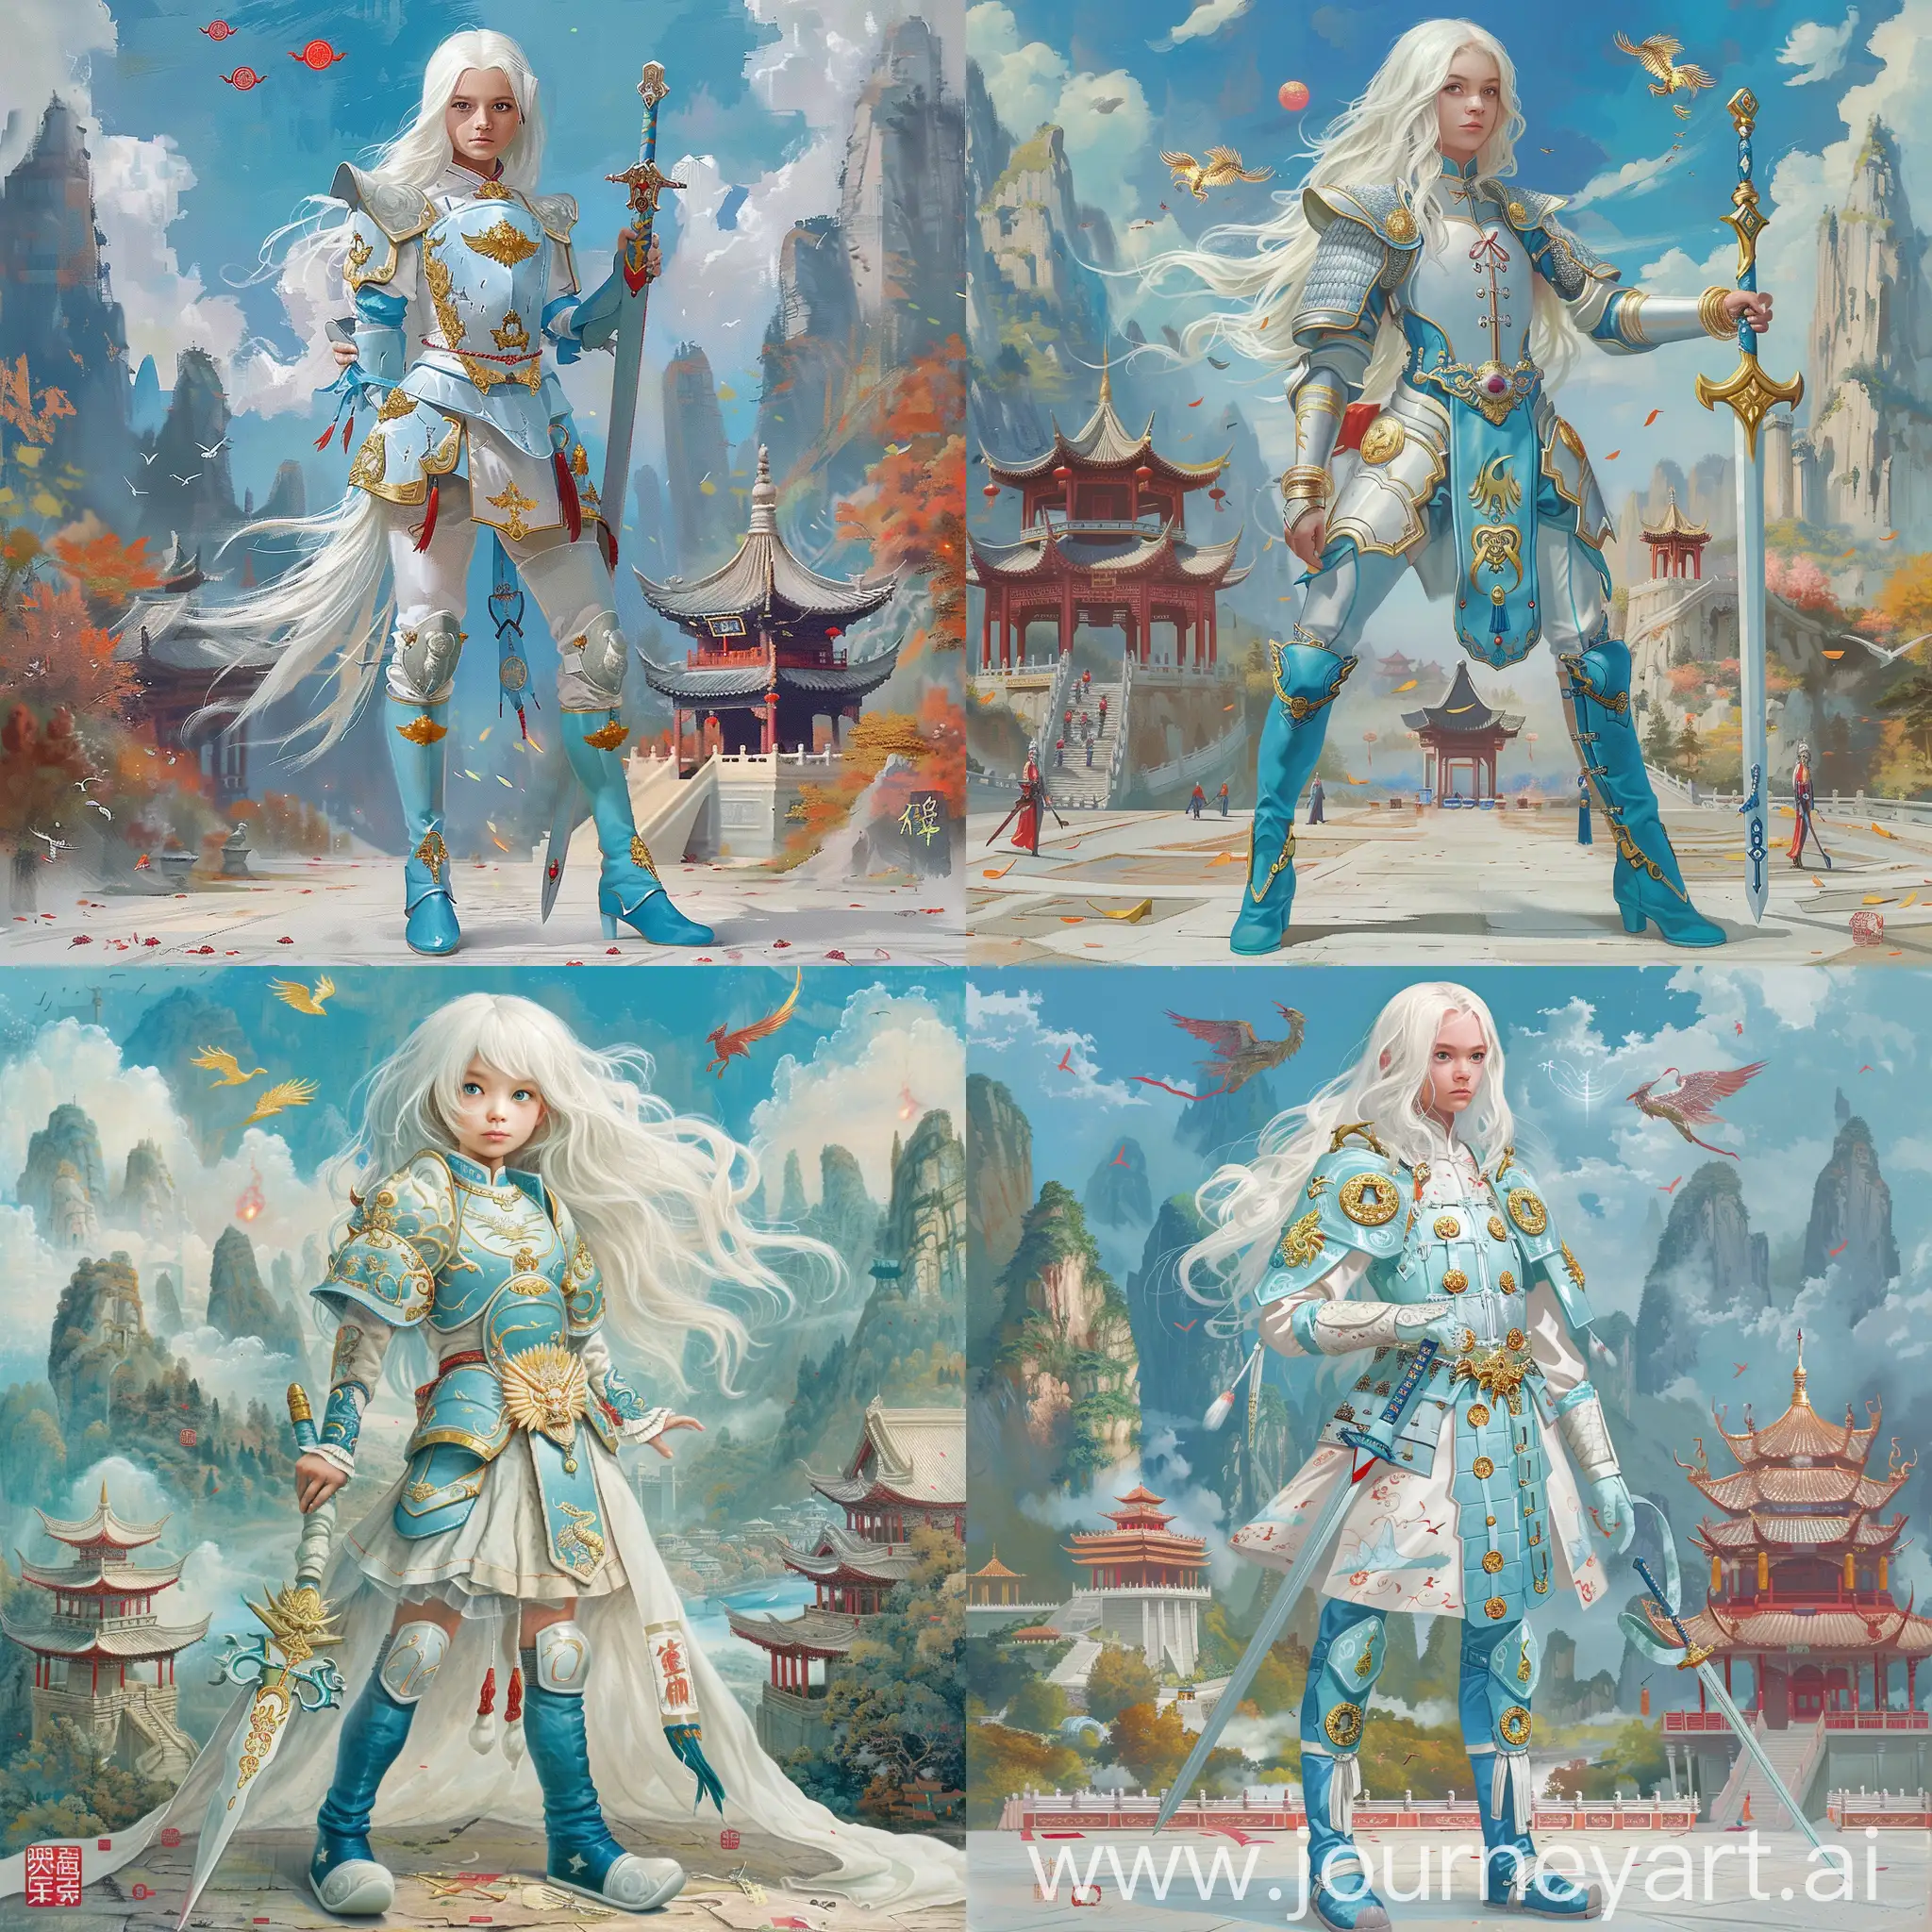 Historic painting style:

a pretty and charming British girl Luna Lovegood, with white long hair, from the Harry Potter movie,

she wears light blue and white color Chinese style medieval armor and blue boots on feet,

golden huffle puff emblems on her armor,
she holds a Chinese sword in right hand, 

Chinese Guilin mountains and temple as background, small phoenix and three small red suns in blue sky.